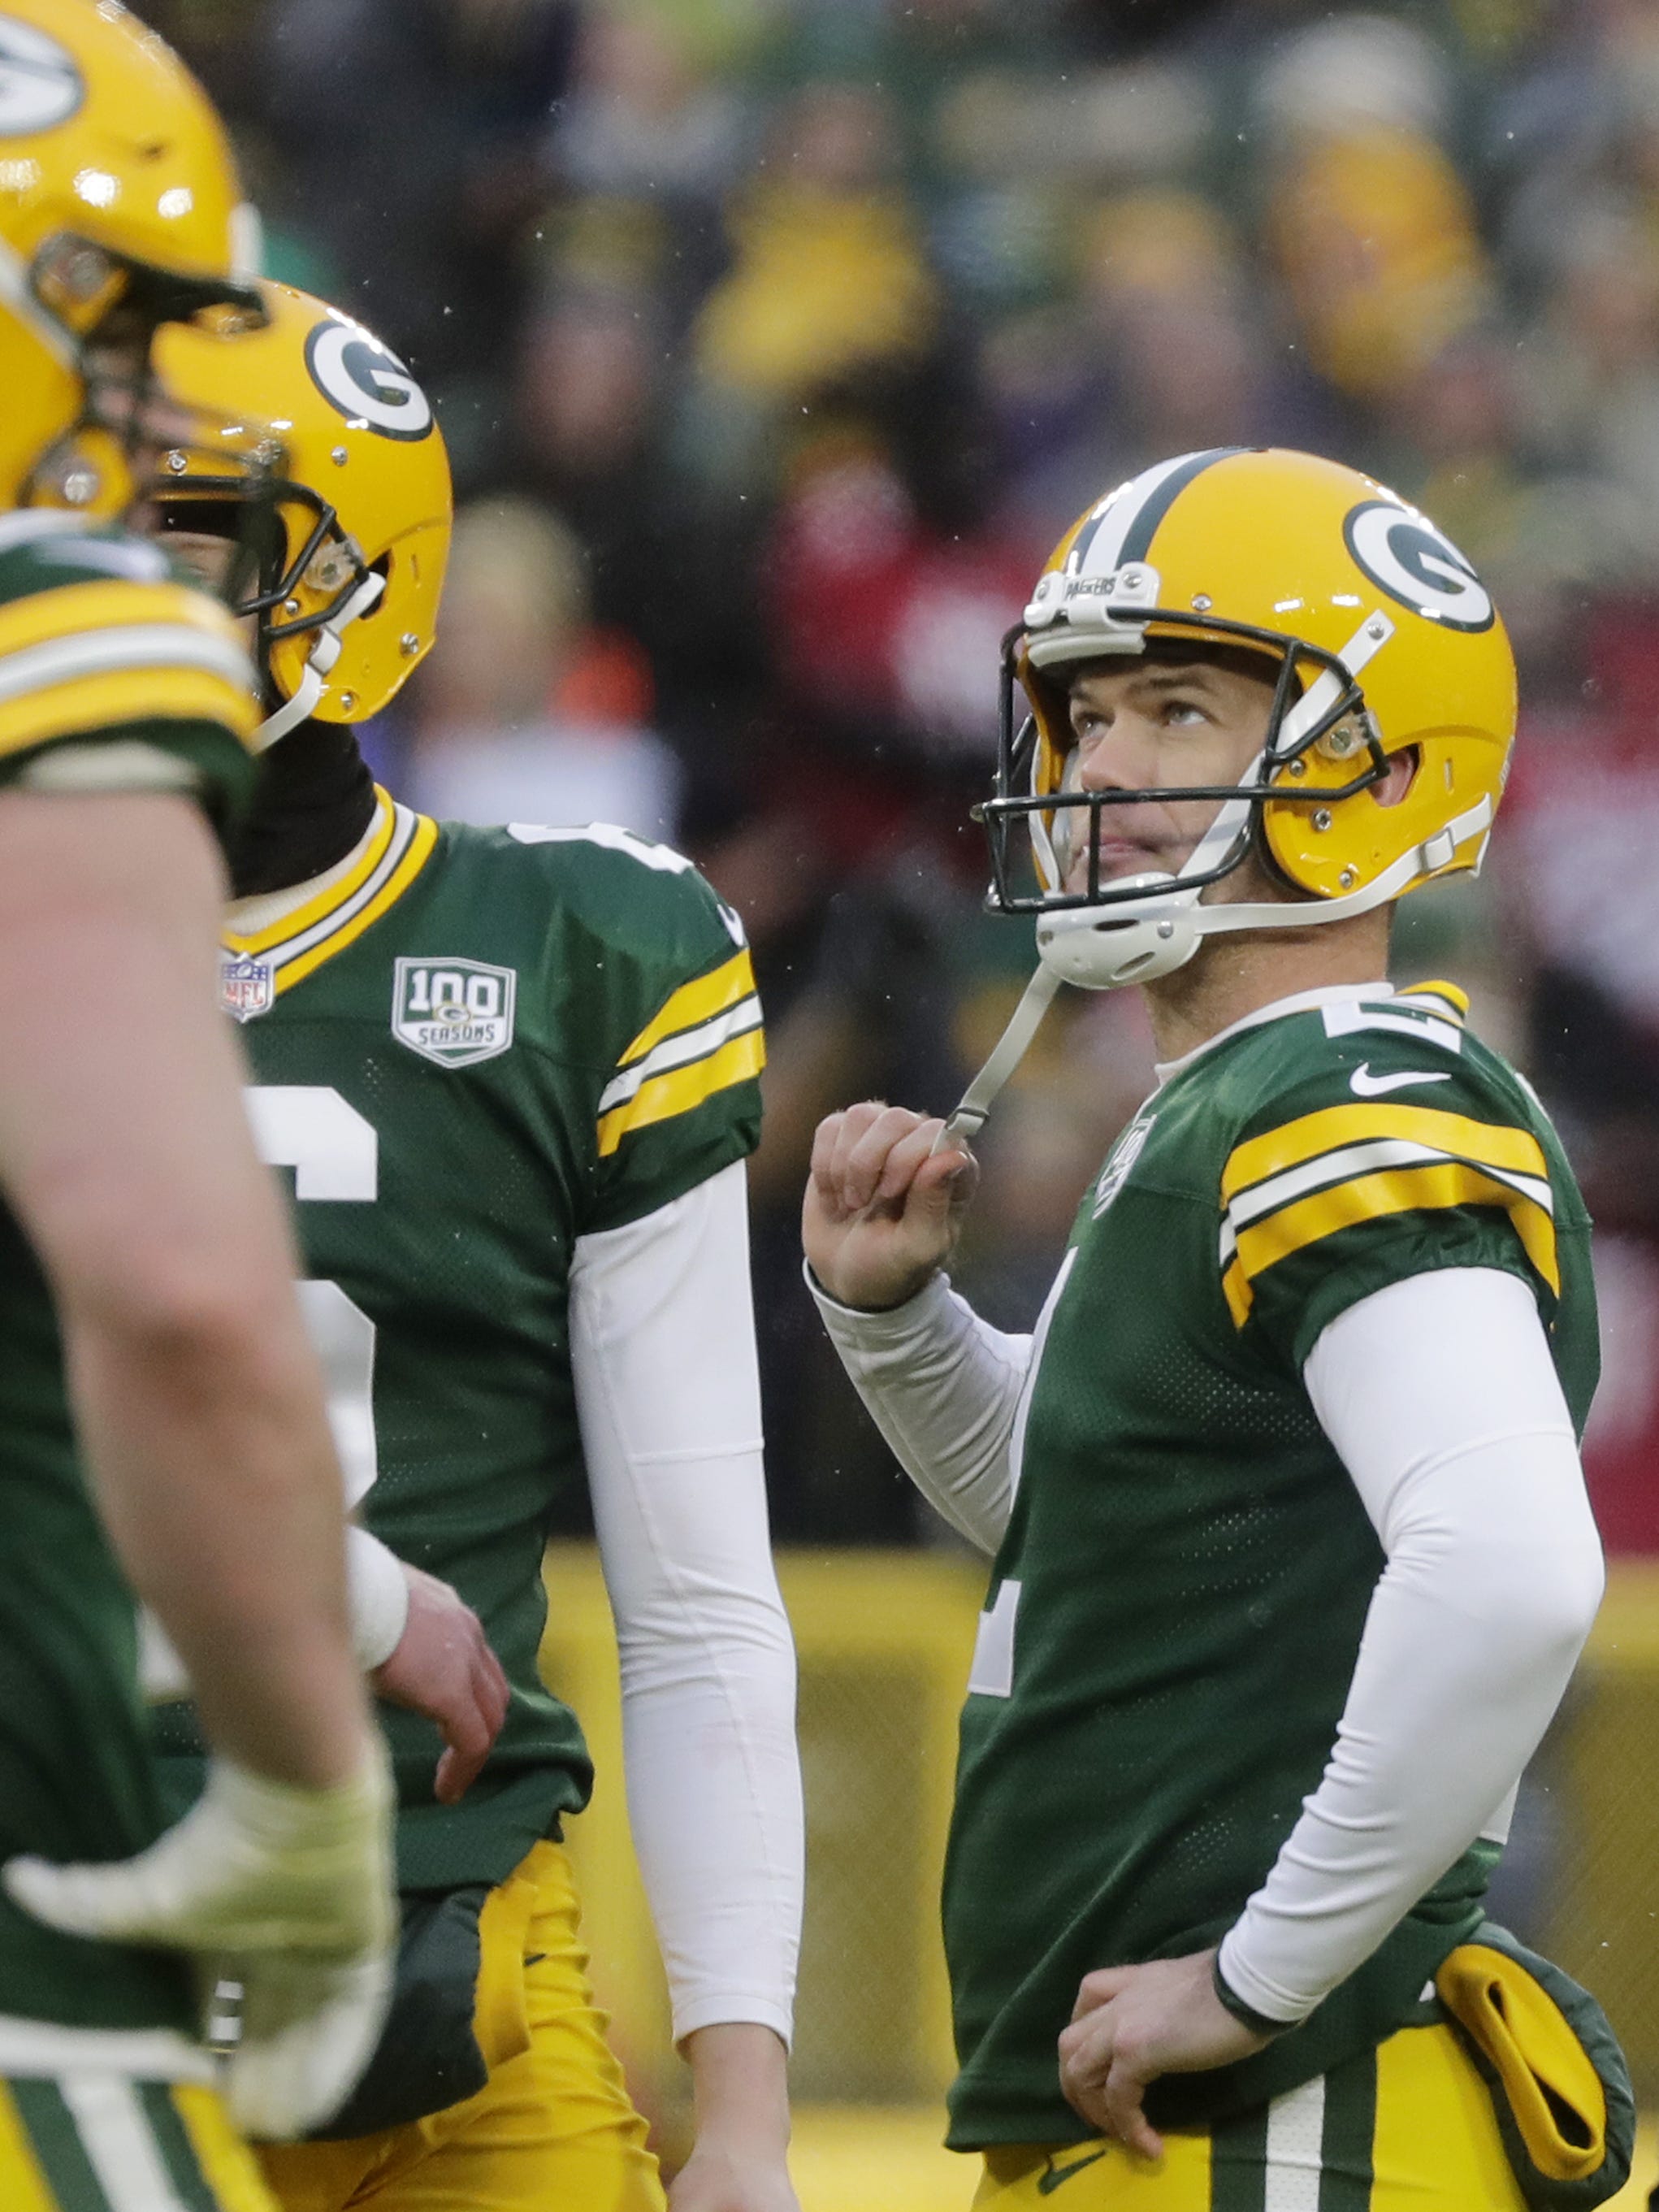 Green Bay Packers kicker Mason Crosby (2) reacts after missing a field goal as time-expired against the Arizona Cardinals at Lambeau Field on Sunday, December 2, 2018 in Green Bay, Wis.